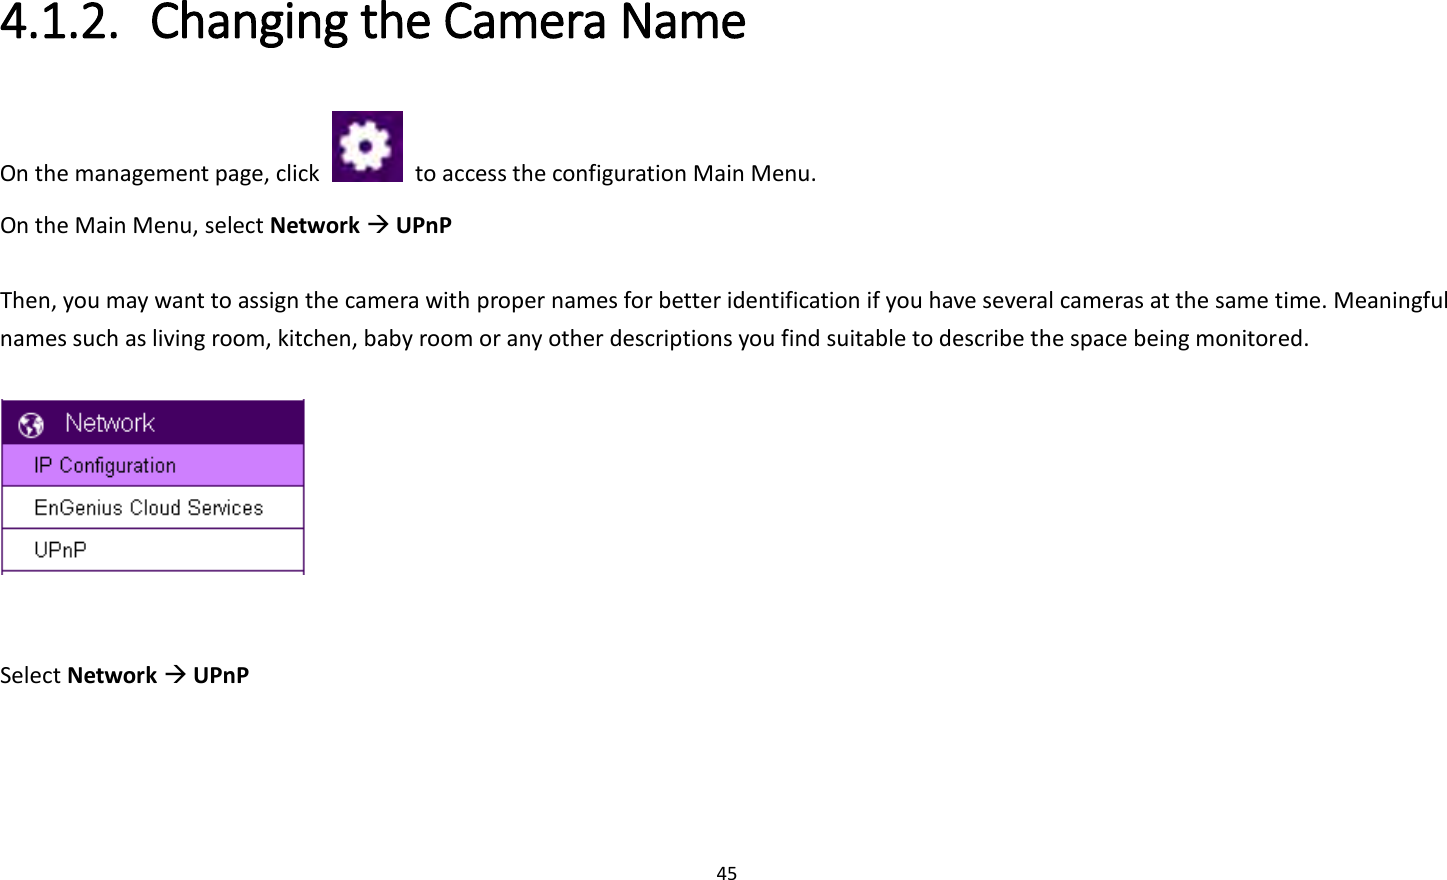 45  4.1.2. Changing the Camera Name   On the management page, click    to access the configuration Main Menu. On the Main Menu, select Network  UPnP  Then, you may want to assign the camera with proper names for better identification if you have several cameras at the same time. Meaningful names such as living room, kitchen, baby room or any other descriptions you find suitable to describe the space being monitored.     Select Network  UPnP  